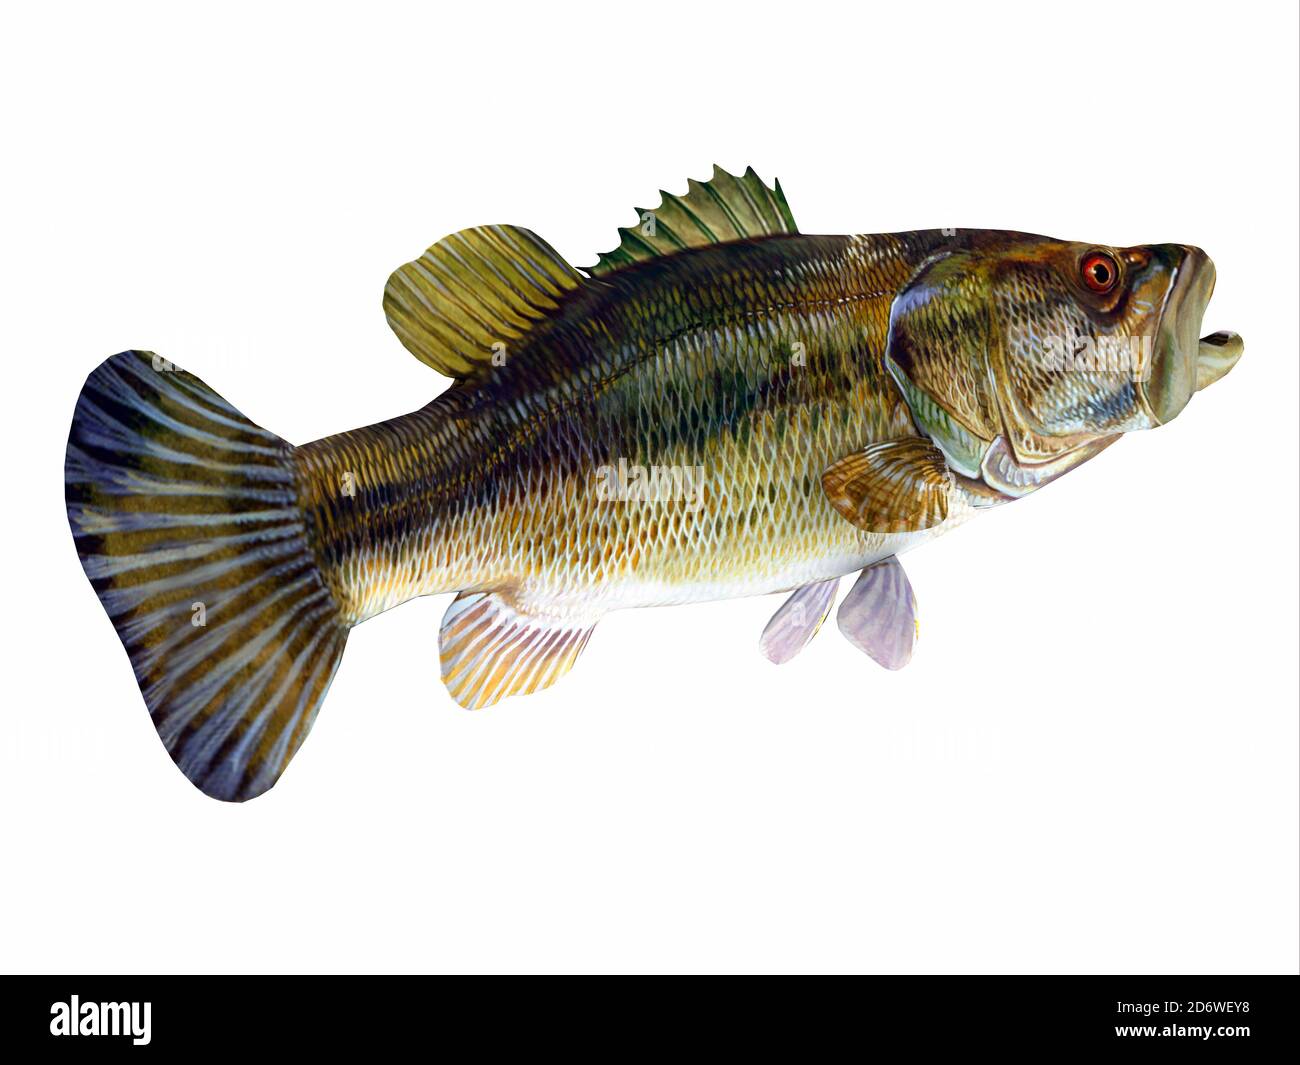 Redeye Bass Tail - The Redeye is species of freshwater bass fish found in lakes, rivers and streams of Georgia and Alabama, USA. Stock Photo